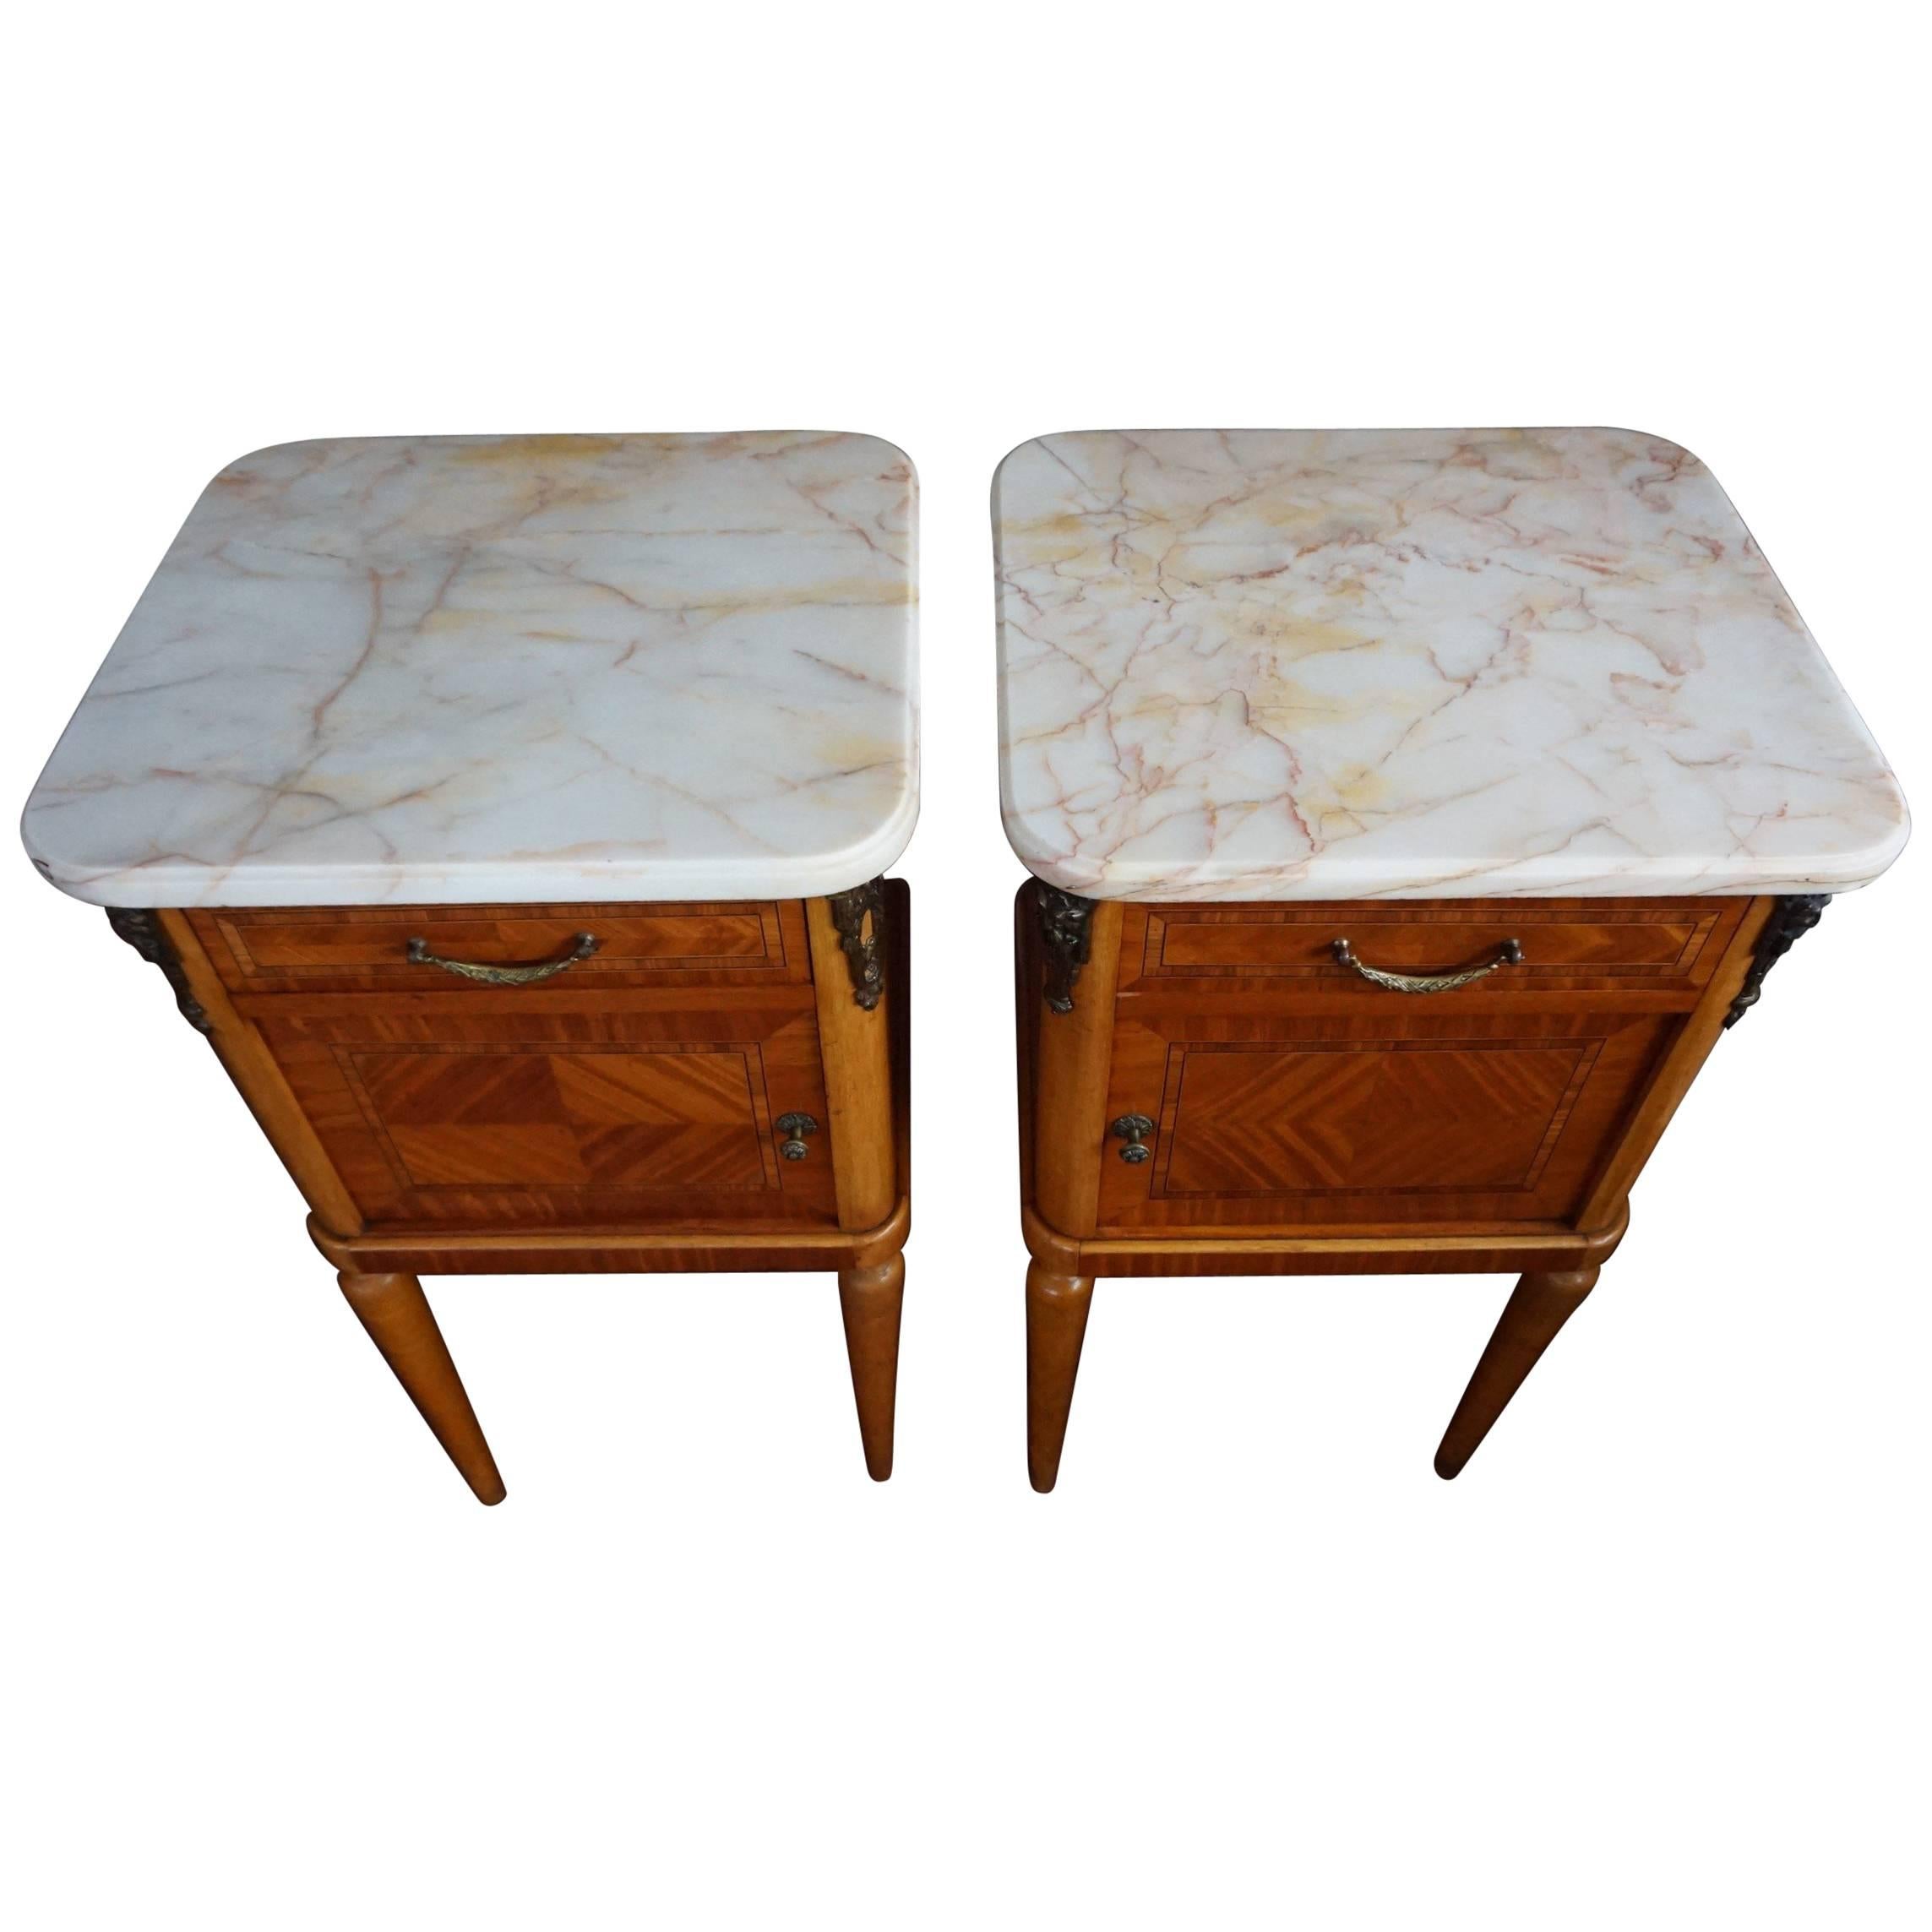 Antique Pair of Kingwood & Inlaid Satinwood Bedside Cabinets / Nightstands